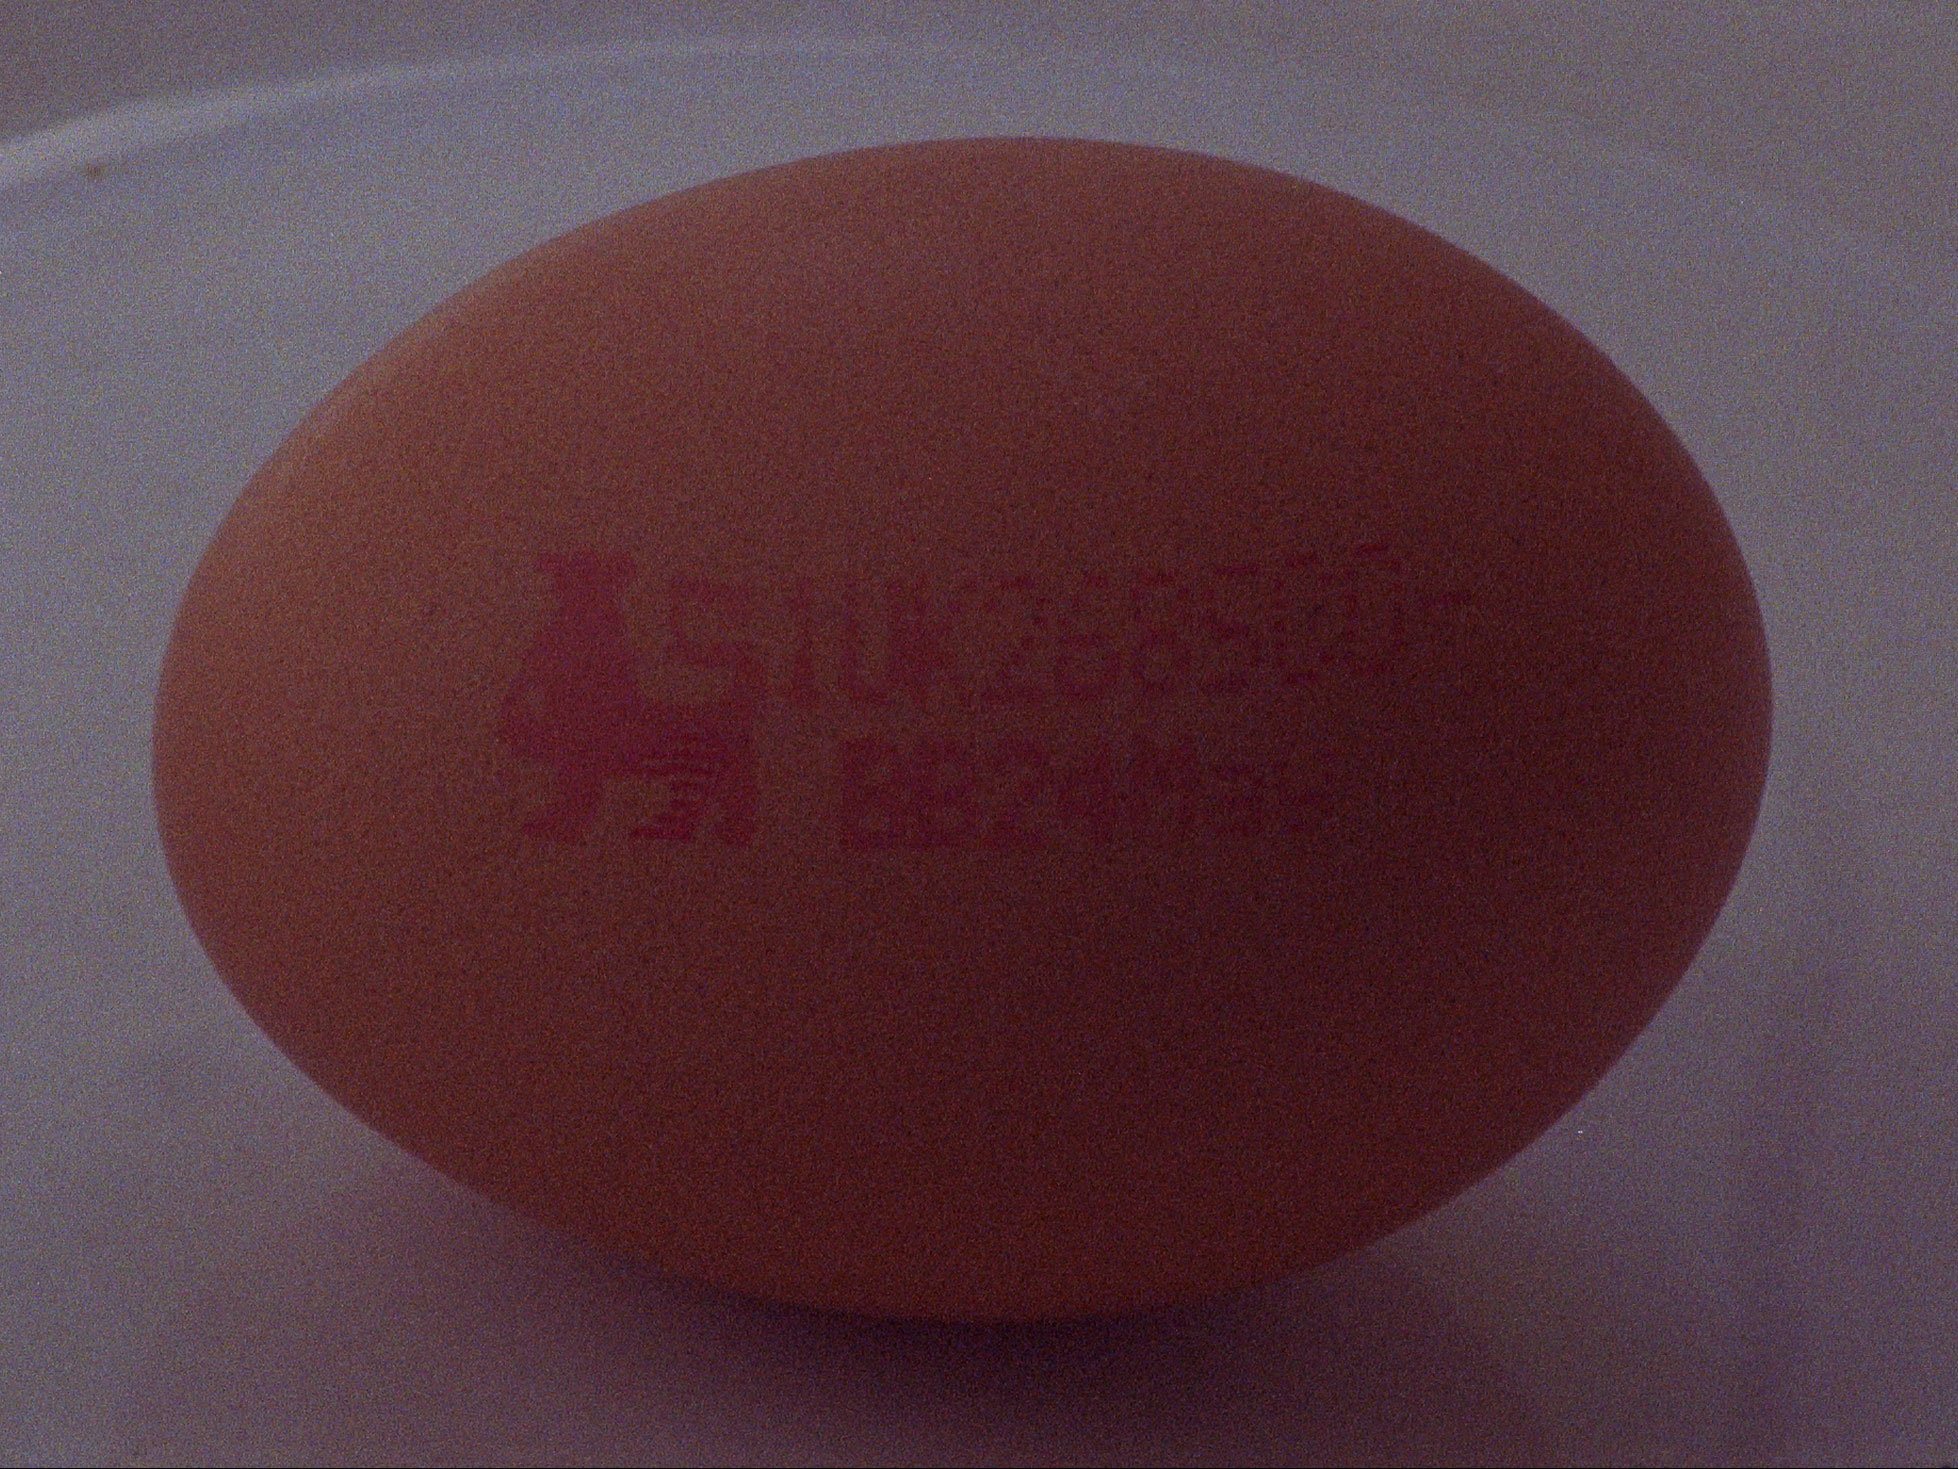 16 mm film still: an egg printed with an expiry date